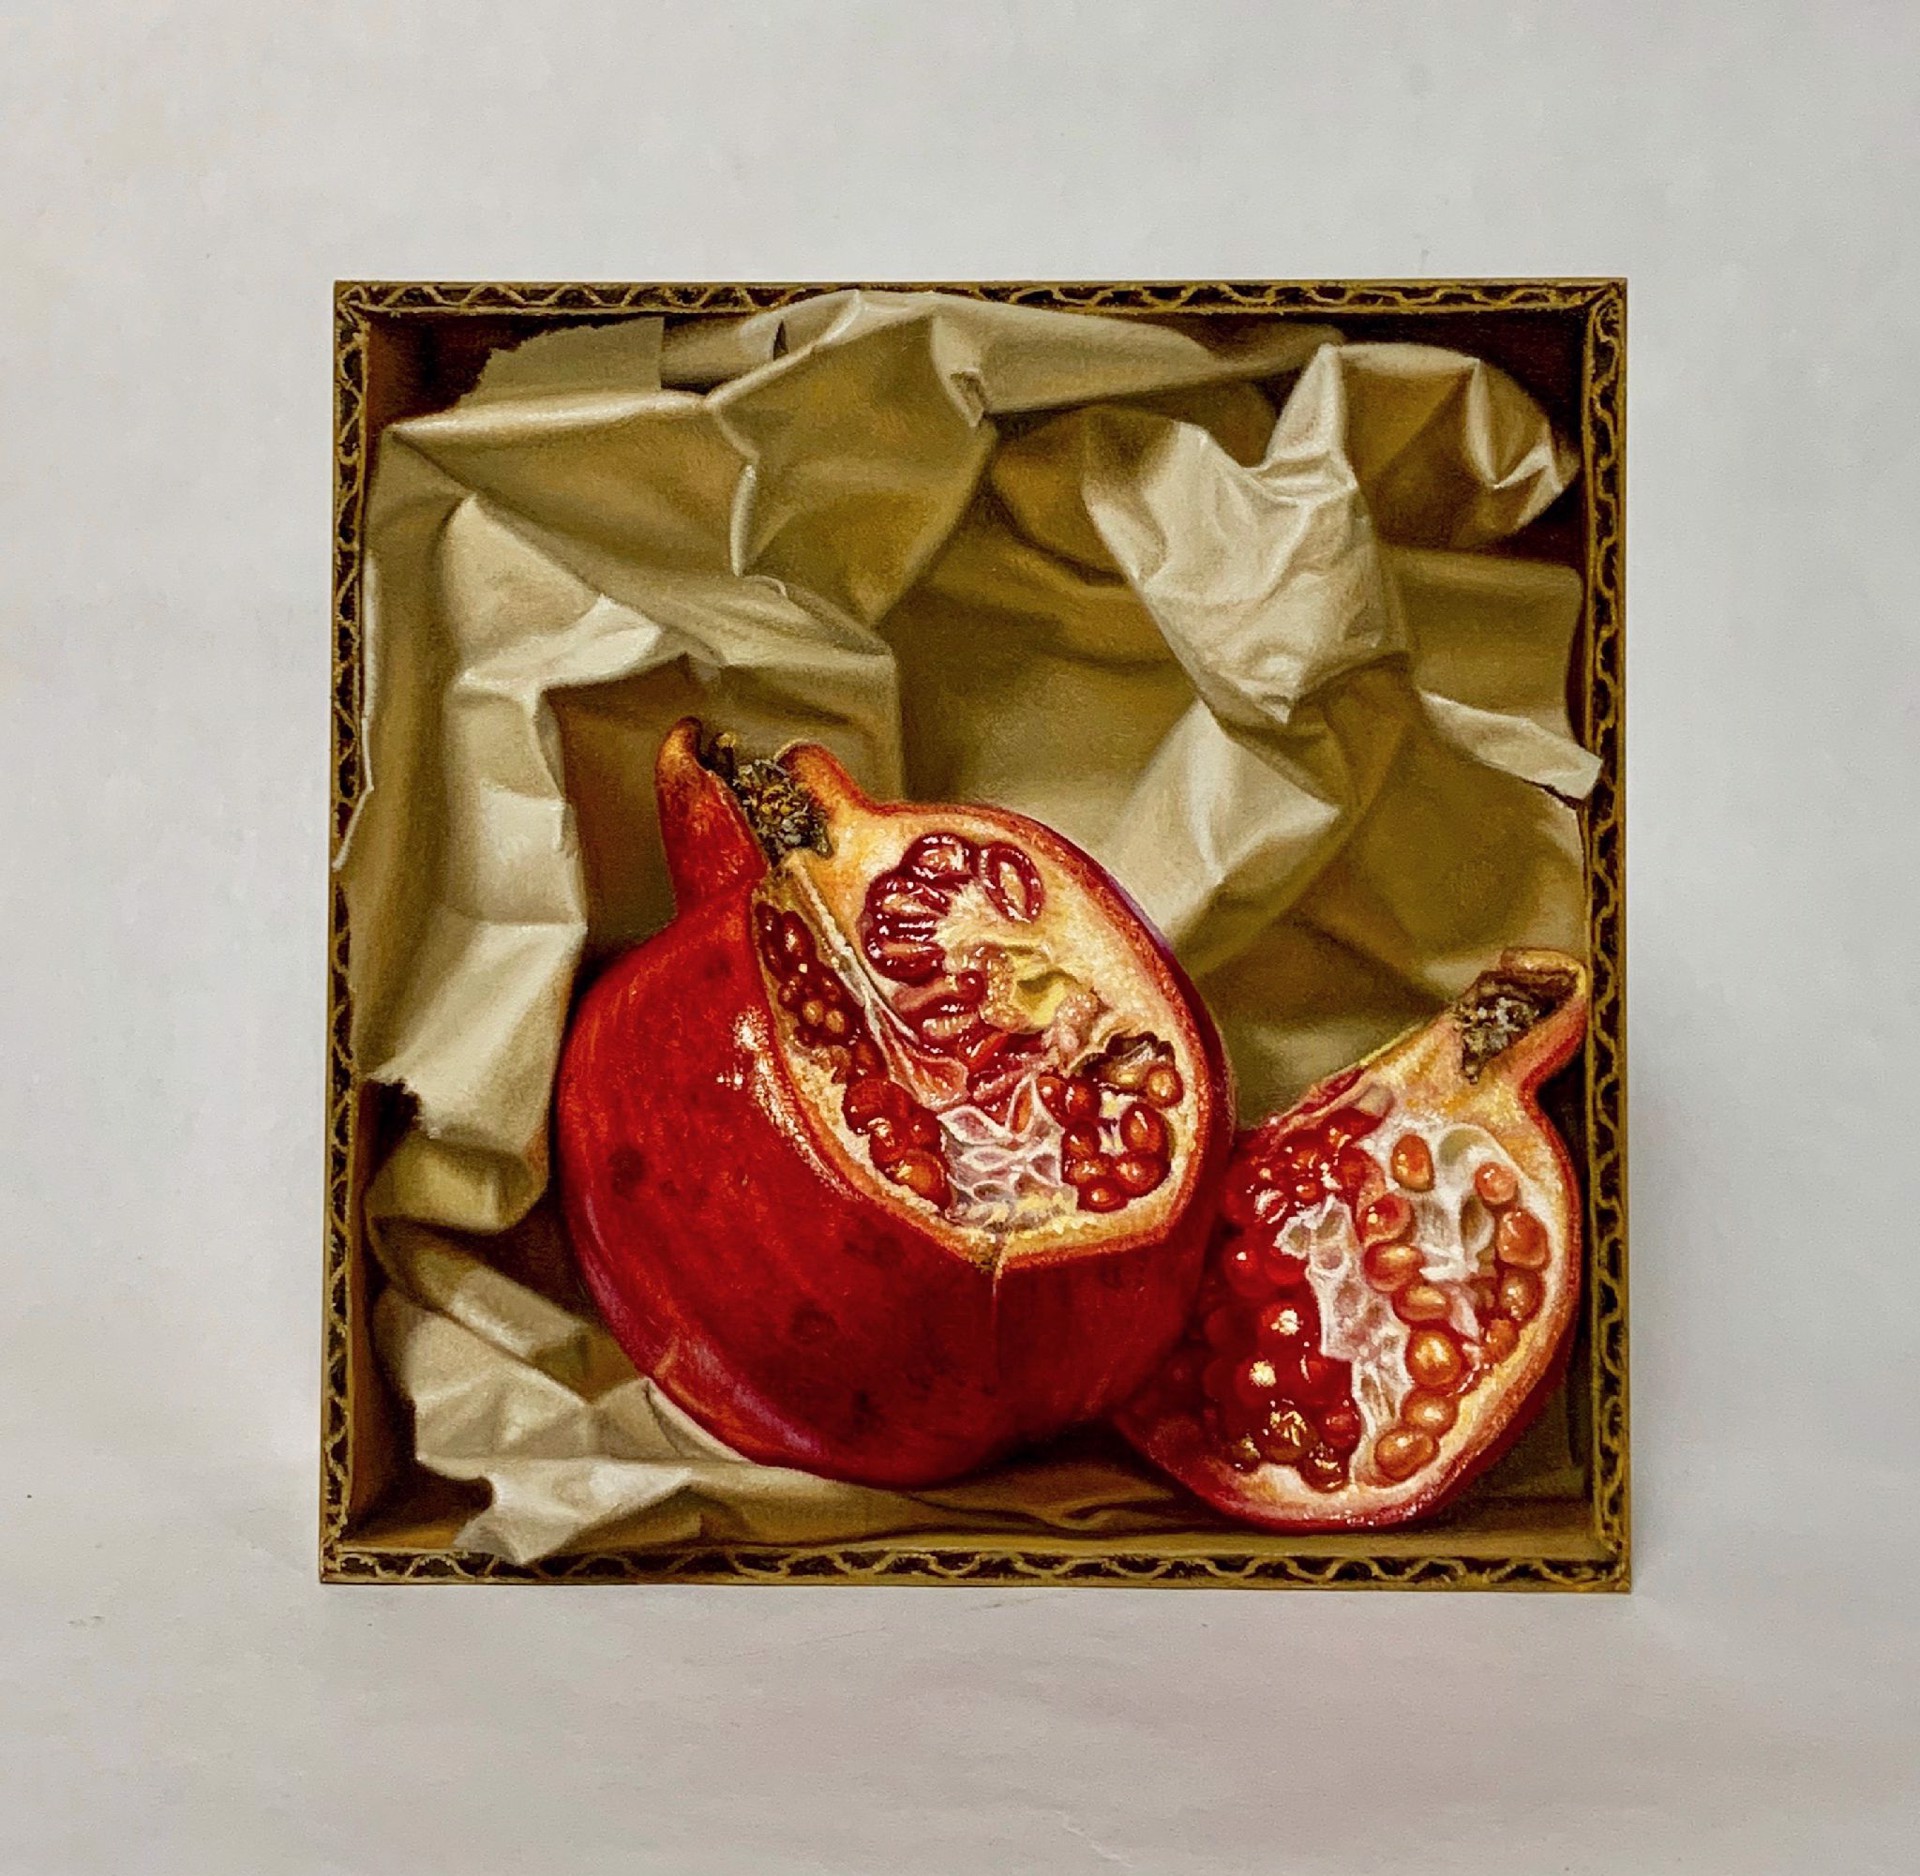 Pomegranate by Natalie Featherston